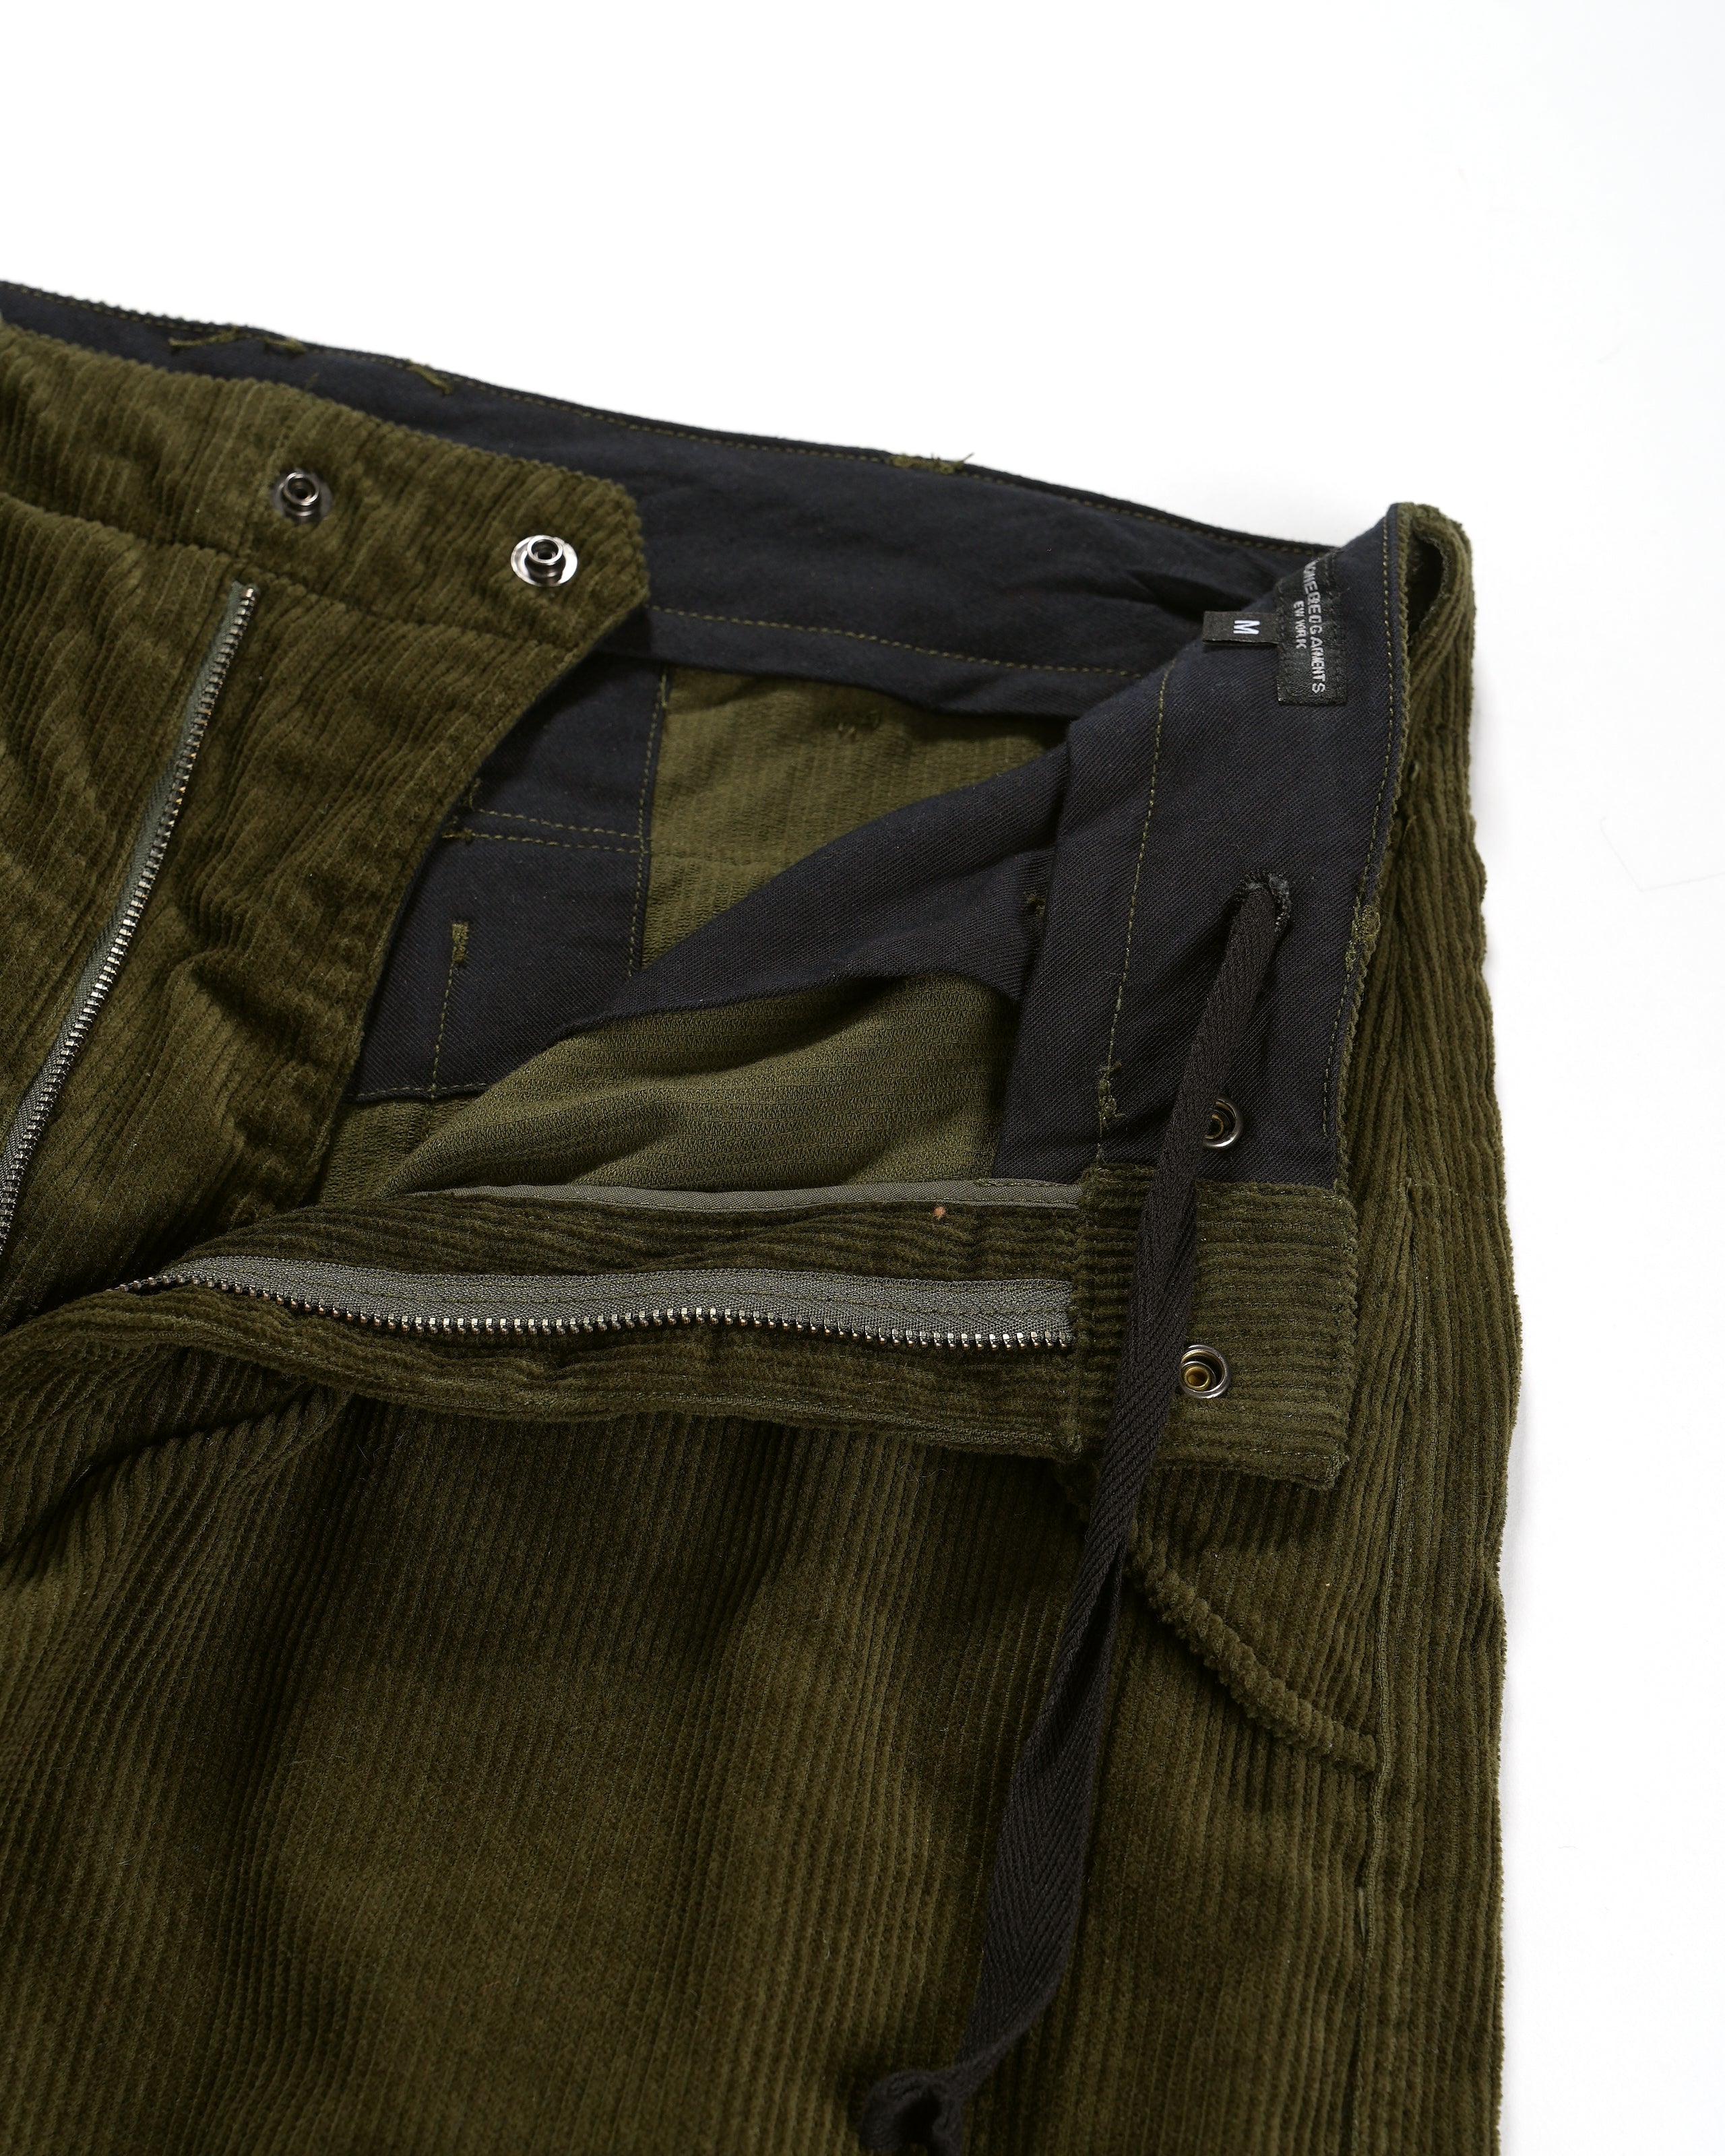 Over Pant - Olive Cotton 8W Corduroy